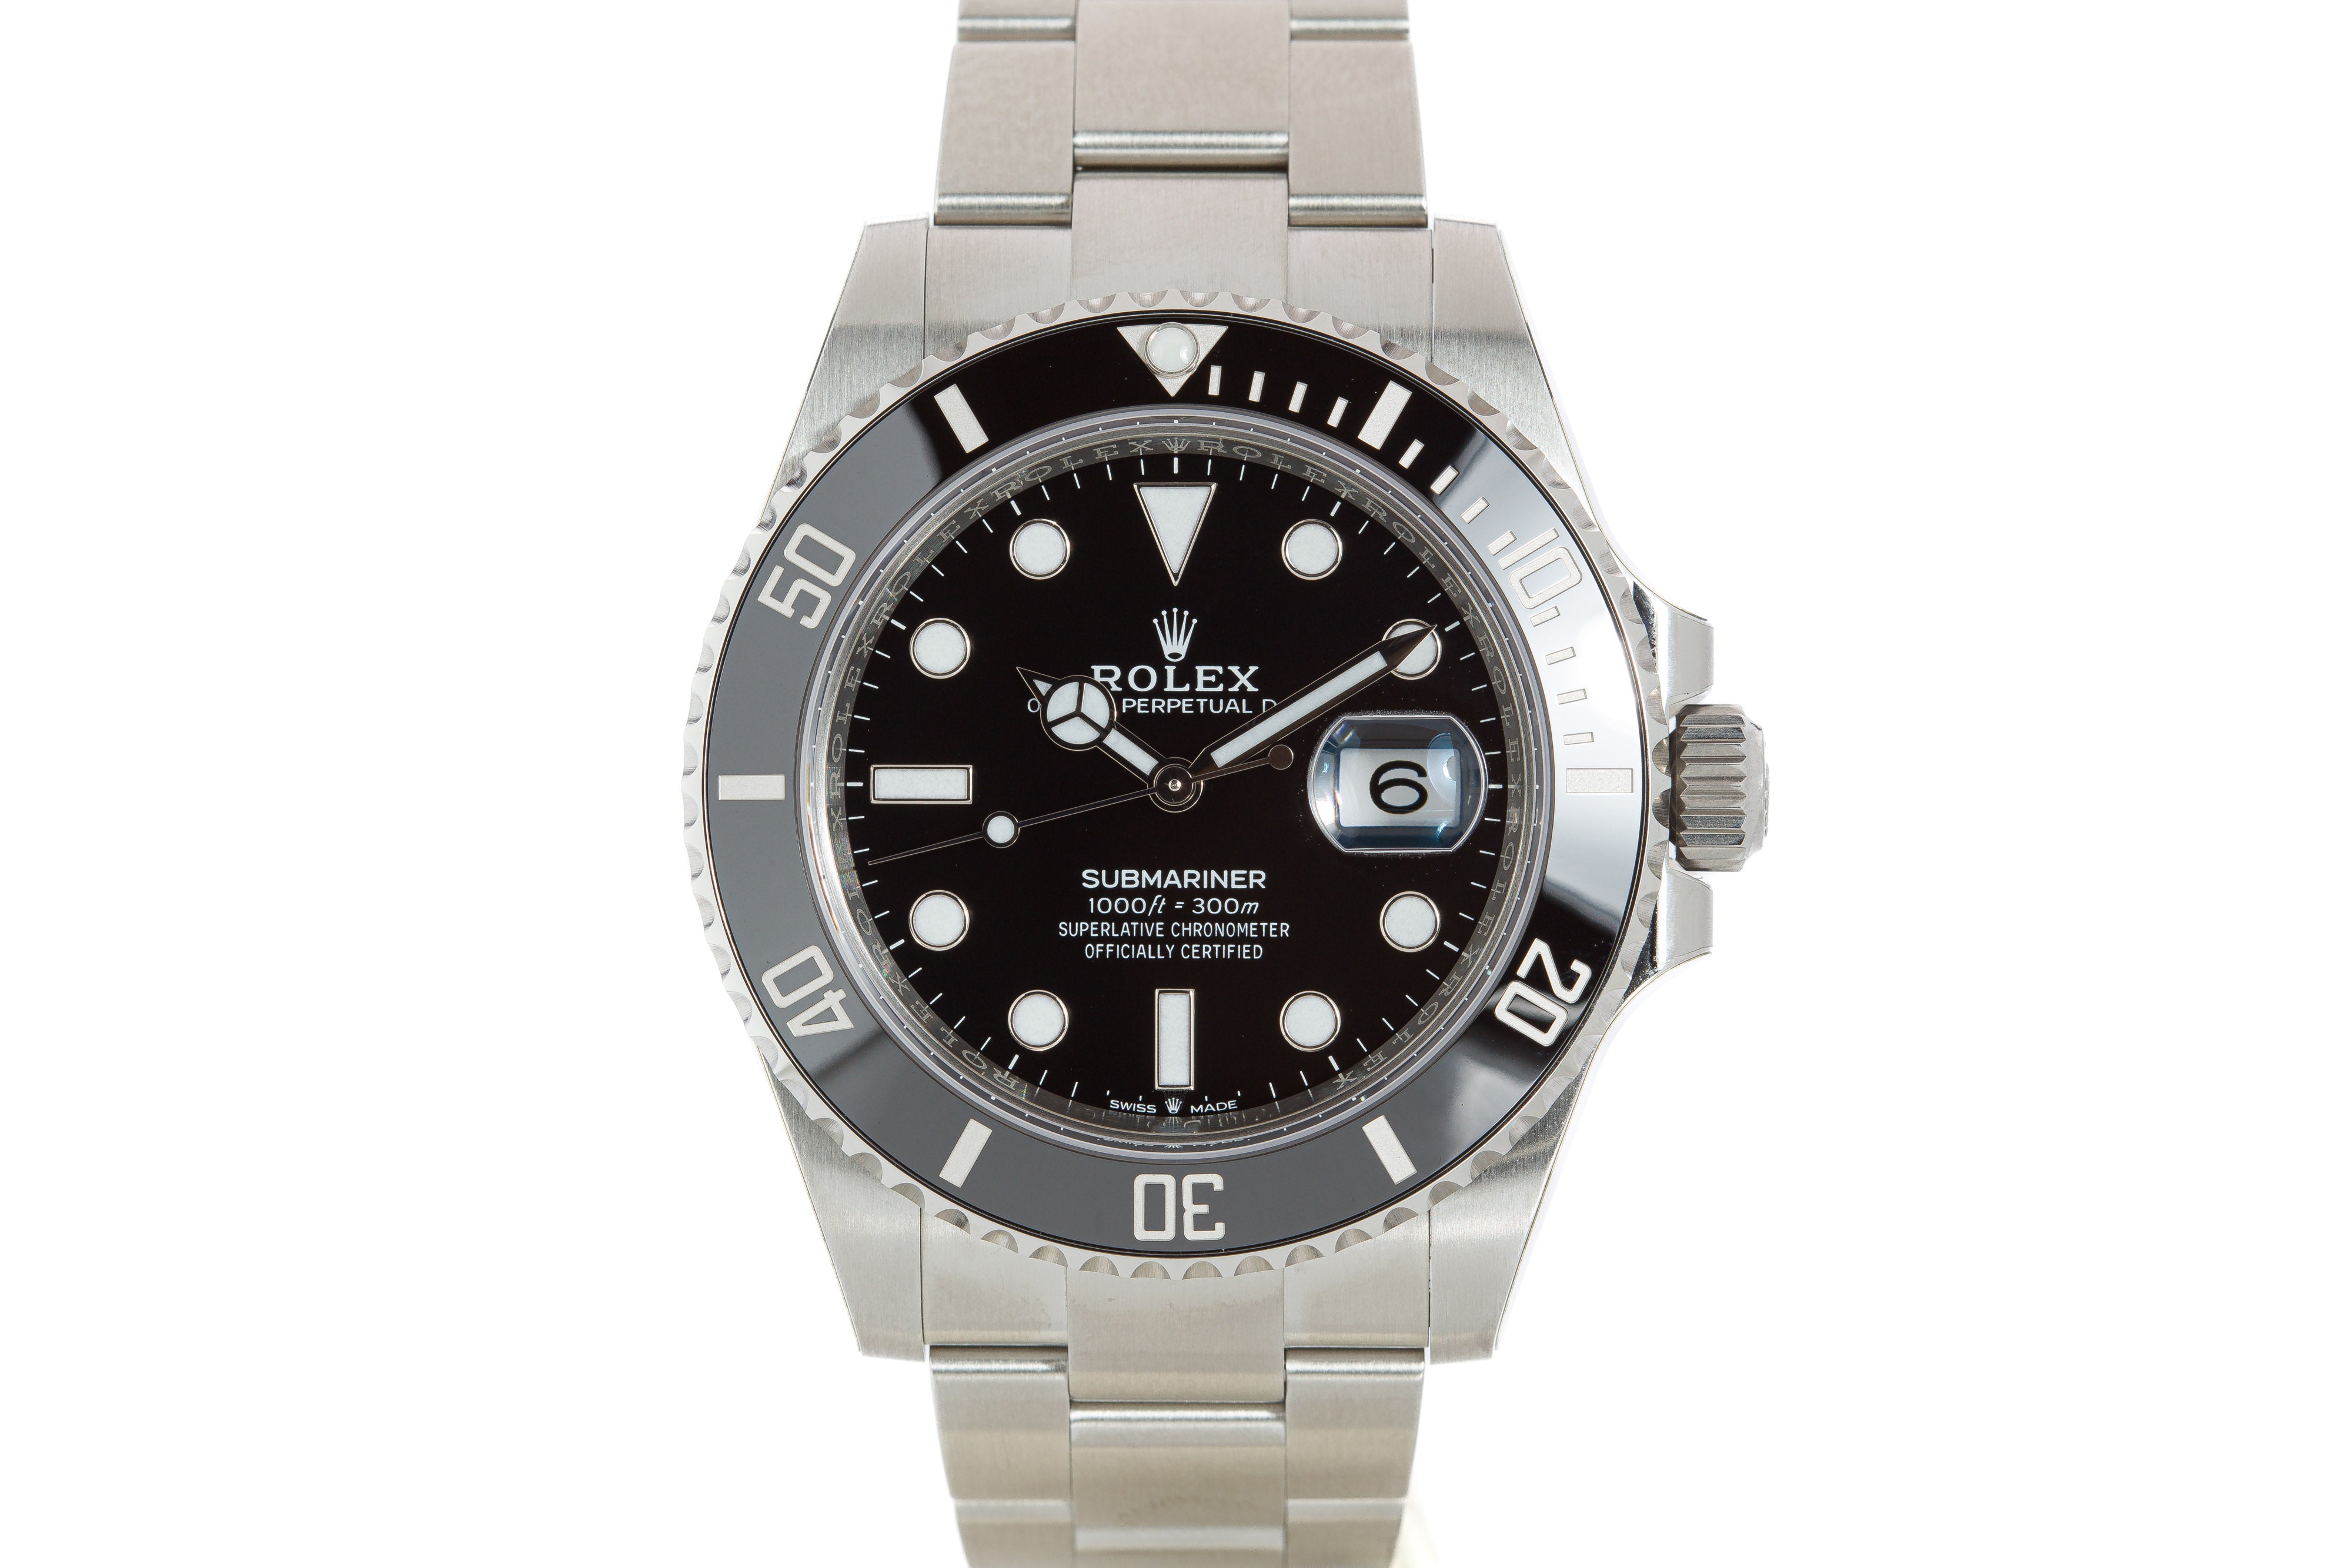 Rolex Submariner 126610 LV 41 mm- Unworn with Box and Papers December 2020  - Watches For Sale from Watch Buyers UK